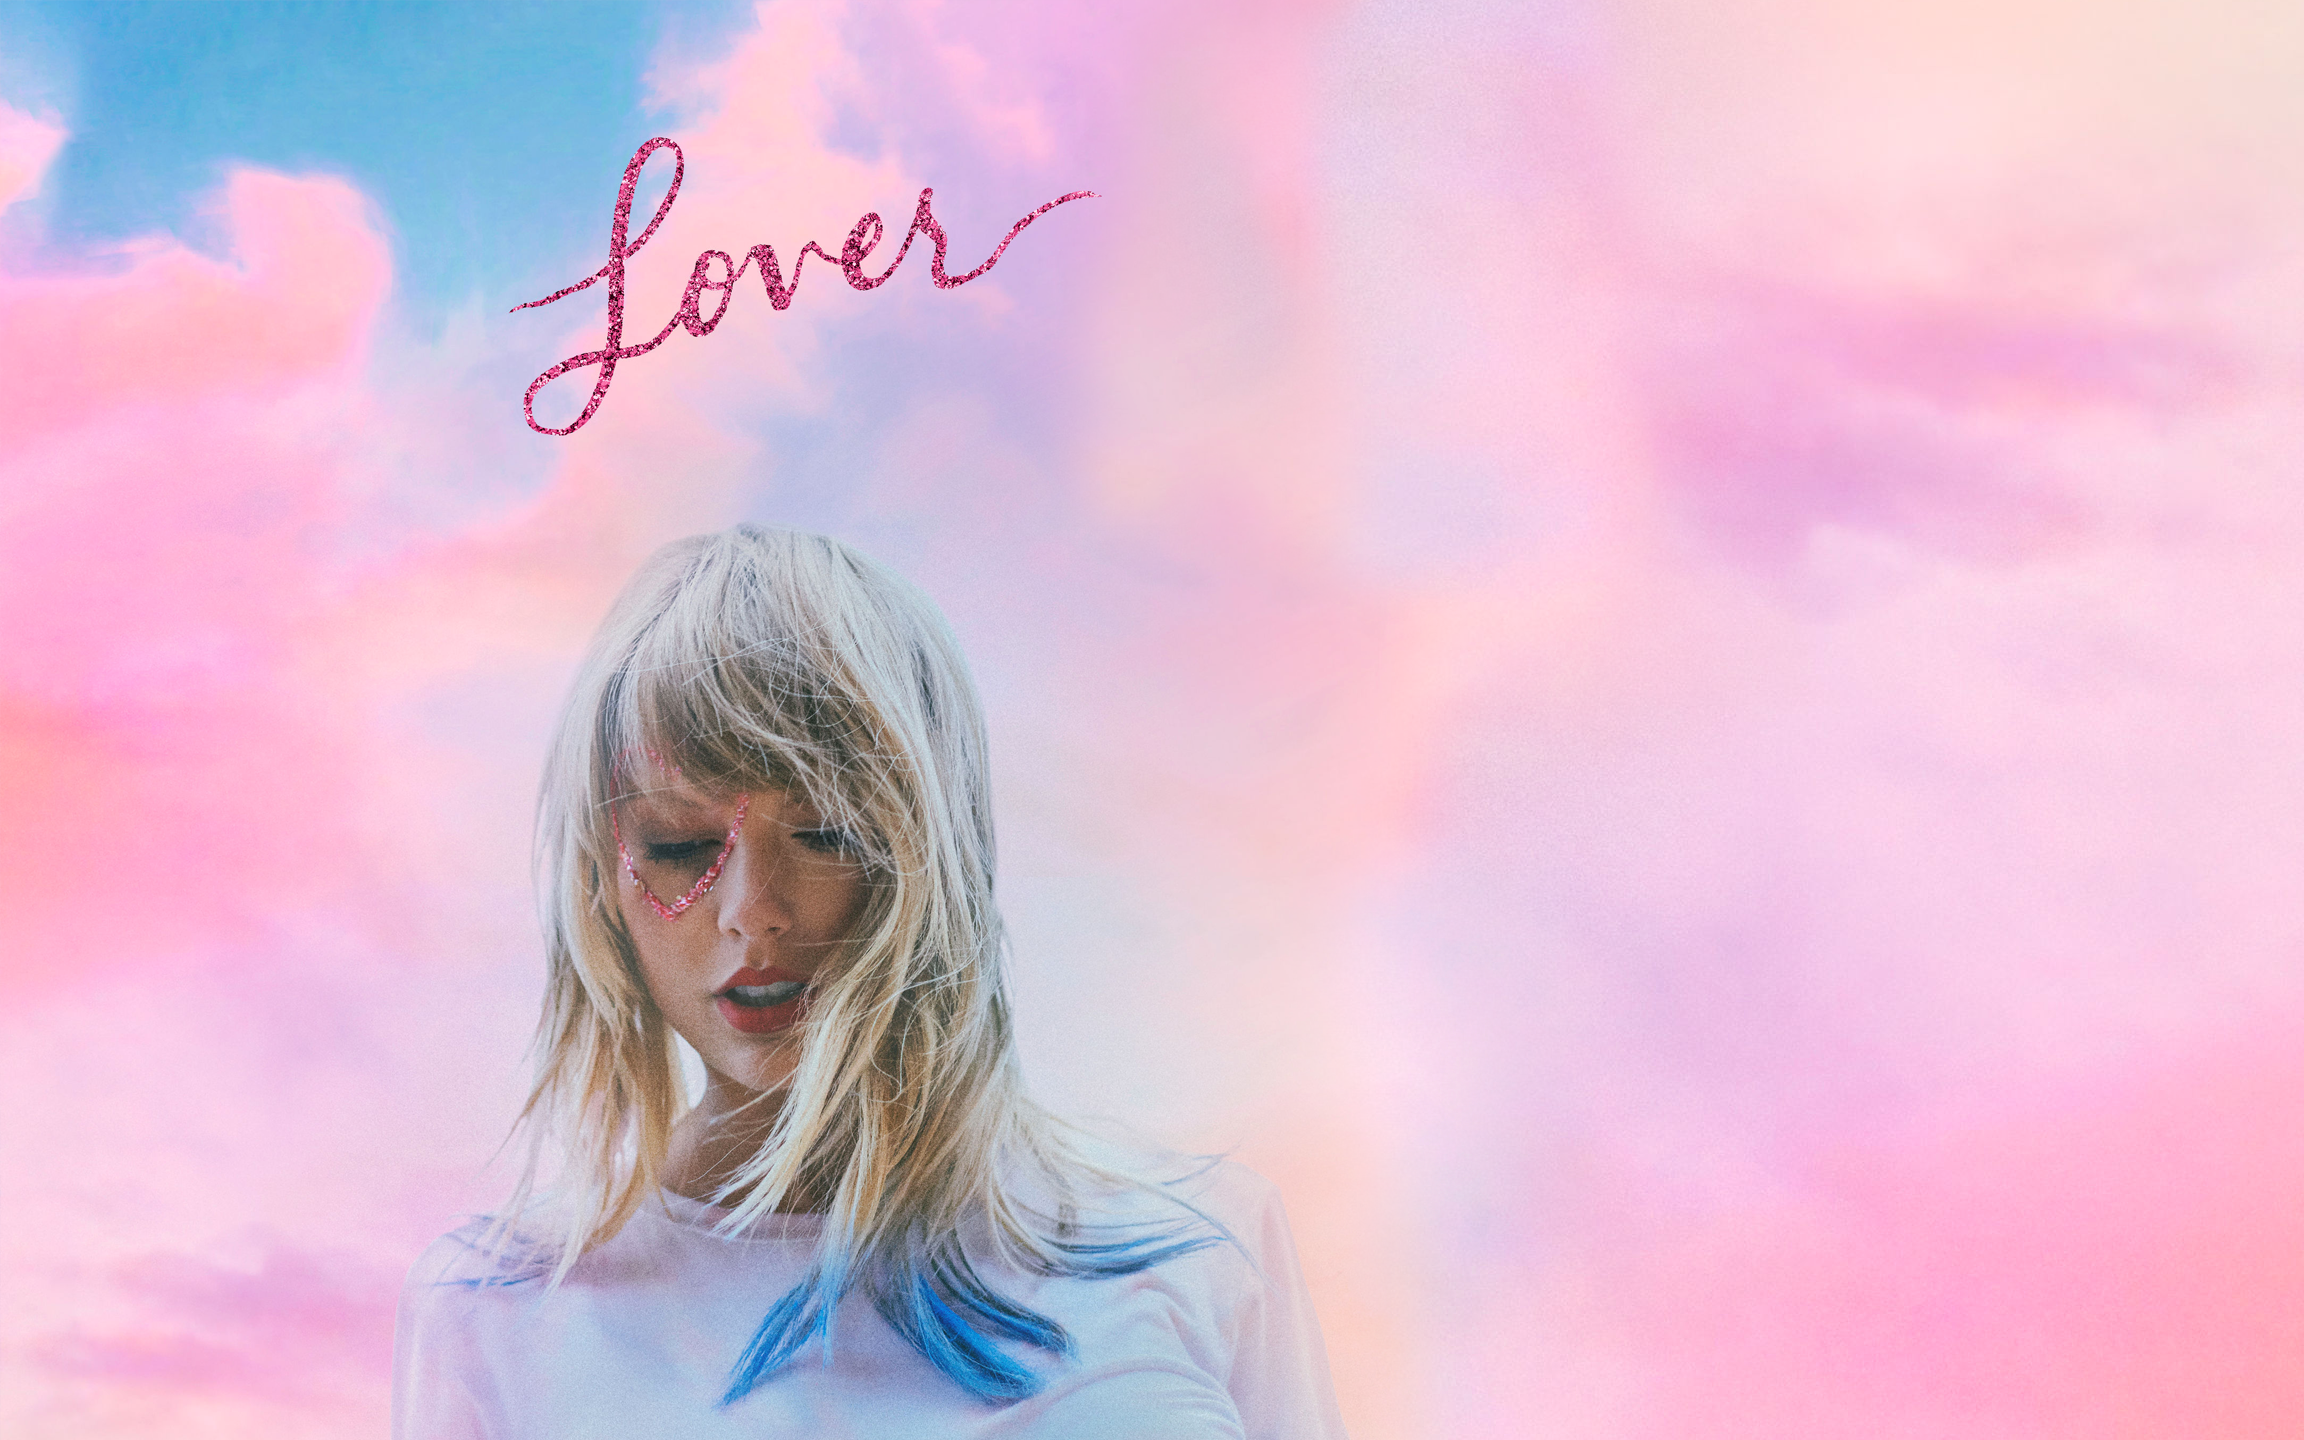 Made a desktop wallpaper featuring the Lover album cover and thought I'd share! [2304x1440]